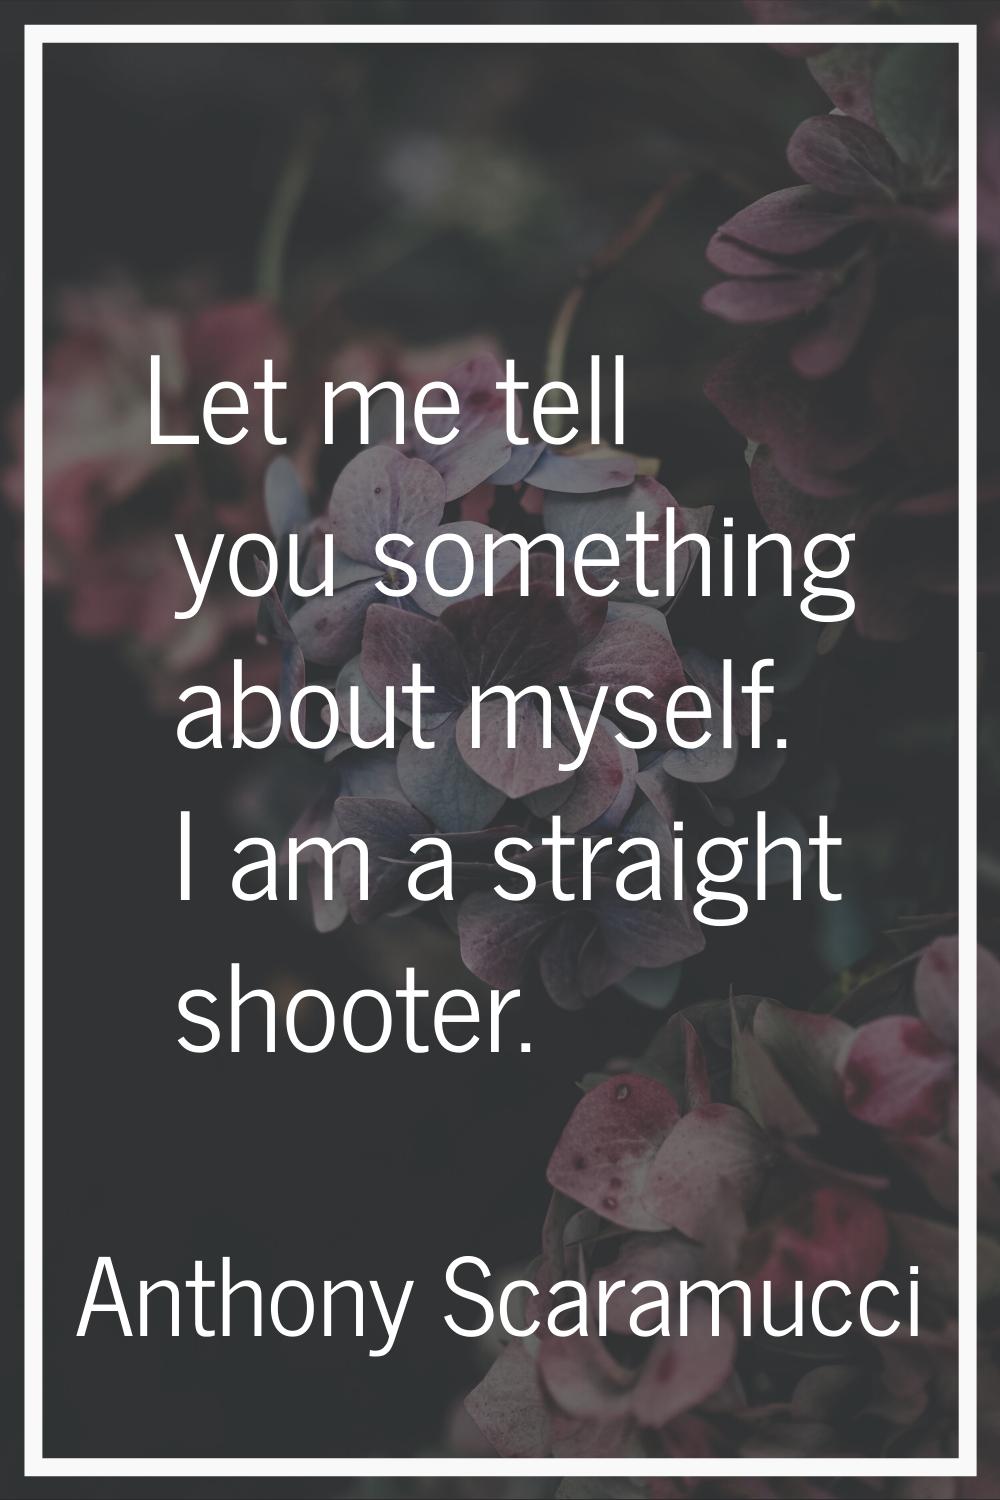 Let me tell you something about myself. I am a straight shooter.